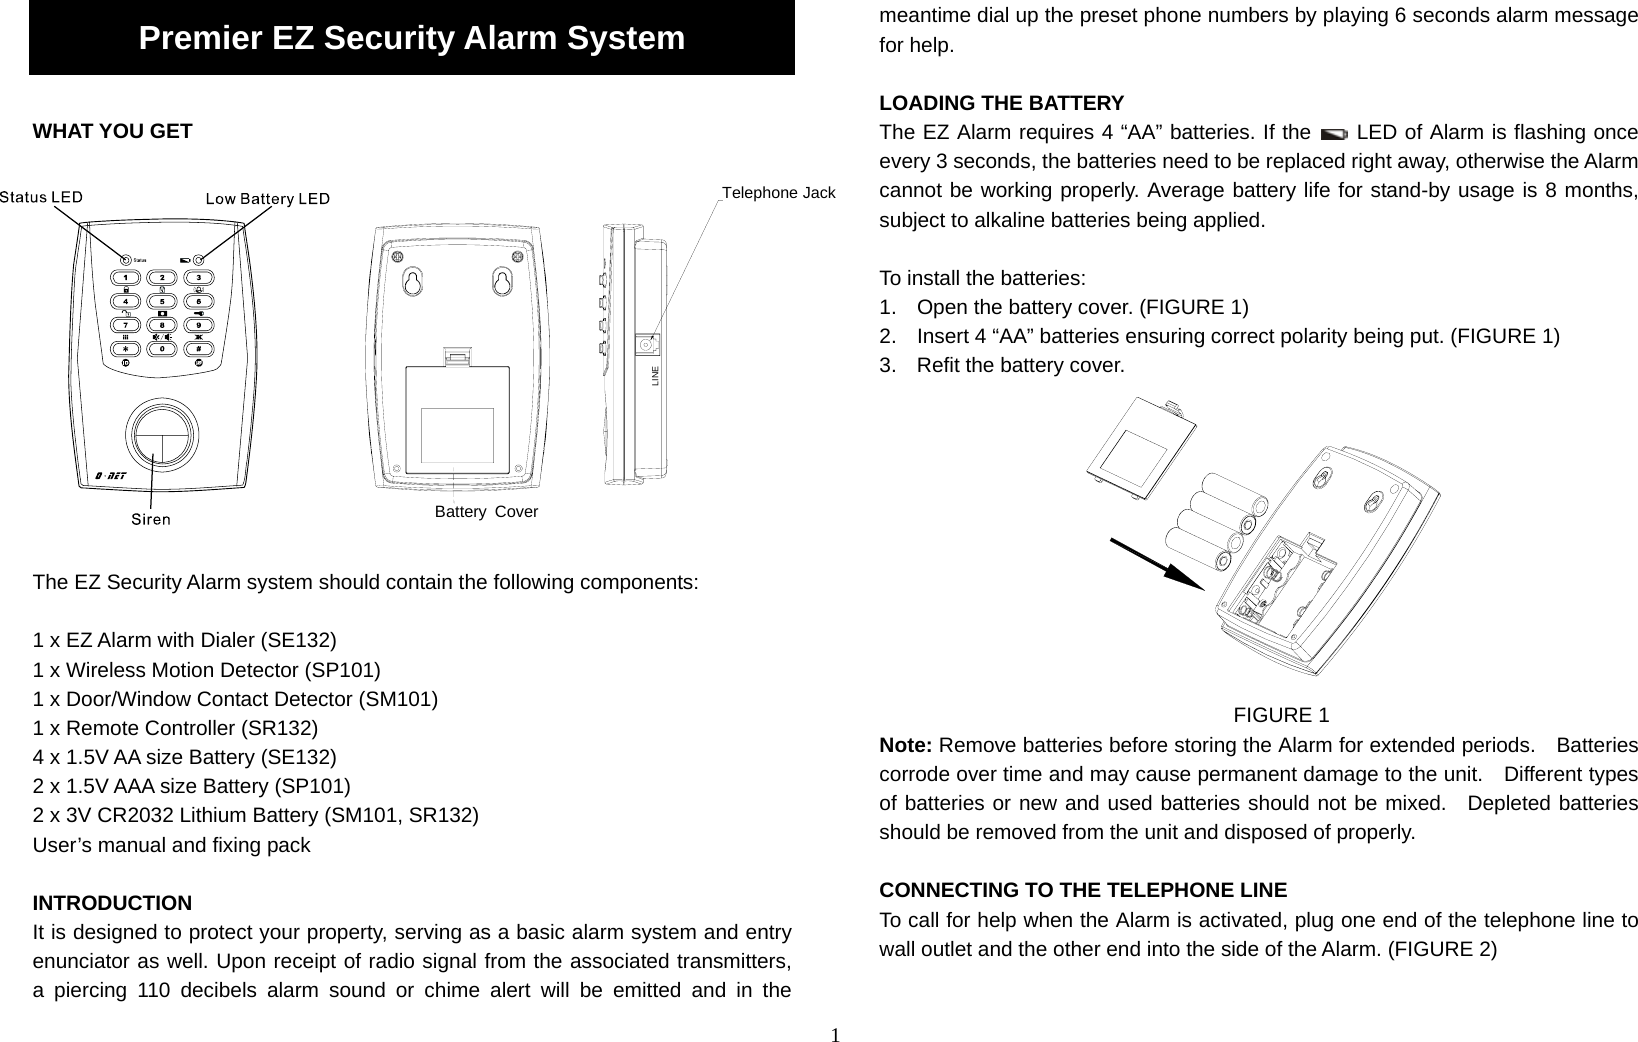 1 Premier EZ Security Alarm System  WHAT YOU GET               The EZ Security Alarm system should contain the following components:  1 x EZ Alarm with Dialer (SE132) 1 x Wireless Motion Detector (SP101) 1 x Door/Window Contact Detector (SM101) 1 x Remote Controller (SR132) 4 x 1.5V AA size Battery (SE132)   2 x 1.5V AAA size Battery (SP101) 2 x 3V CR2032 Lithium Battery (SM101, SR132) User’s manual and fixing pack  INTRODUCTION It is designed to protect your property, serving as a basic alarm system and entry enunciator as well. Upon receipt of radio signal from the associated transmitters,  a piercing 110 decibels alarm sound or chime alert will be emitted and in the meantime dial up the preset phone numbers by playing 6 seconds alarm message for help.  LOADING THE BATTERY The EZ Alarm requires 4 “AA” batteries. If the   LED of Alarm is flashing once every 3 seconds, the batteries need to be replaced right away, otherwise the Alarm cannot be working properly. Average battery life for stand-by usage is 8 months, subject to alkaline batteries being applied.  To install the batteries: 1.  Open the battery cover. (FIGURE 1) 2.  Insert 4 “AA” batteries ensuring correct polarity being put. (FIGURE 1) 3.  Refit the battery cover.                                              FIGURE 1 Note: Remove batteries before storing the Alarm for extended periods.    Batteries corrode over time and may cause permanent damage to the unit.    Different types of batteries or new and used batteries should not be mixed.  Depleted batteries should be removed from the unit and disposed of properly.  CONNECTING TO THE TELEPHONE LINE To call for help when the Alarm is activated, plug one end of the telephone line to wall outlet and the other end into the side of the Alarm. (FIGURE 2)   Battery CoverLINETelephone Jack